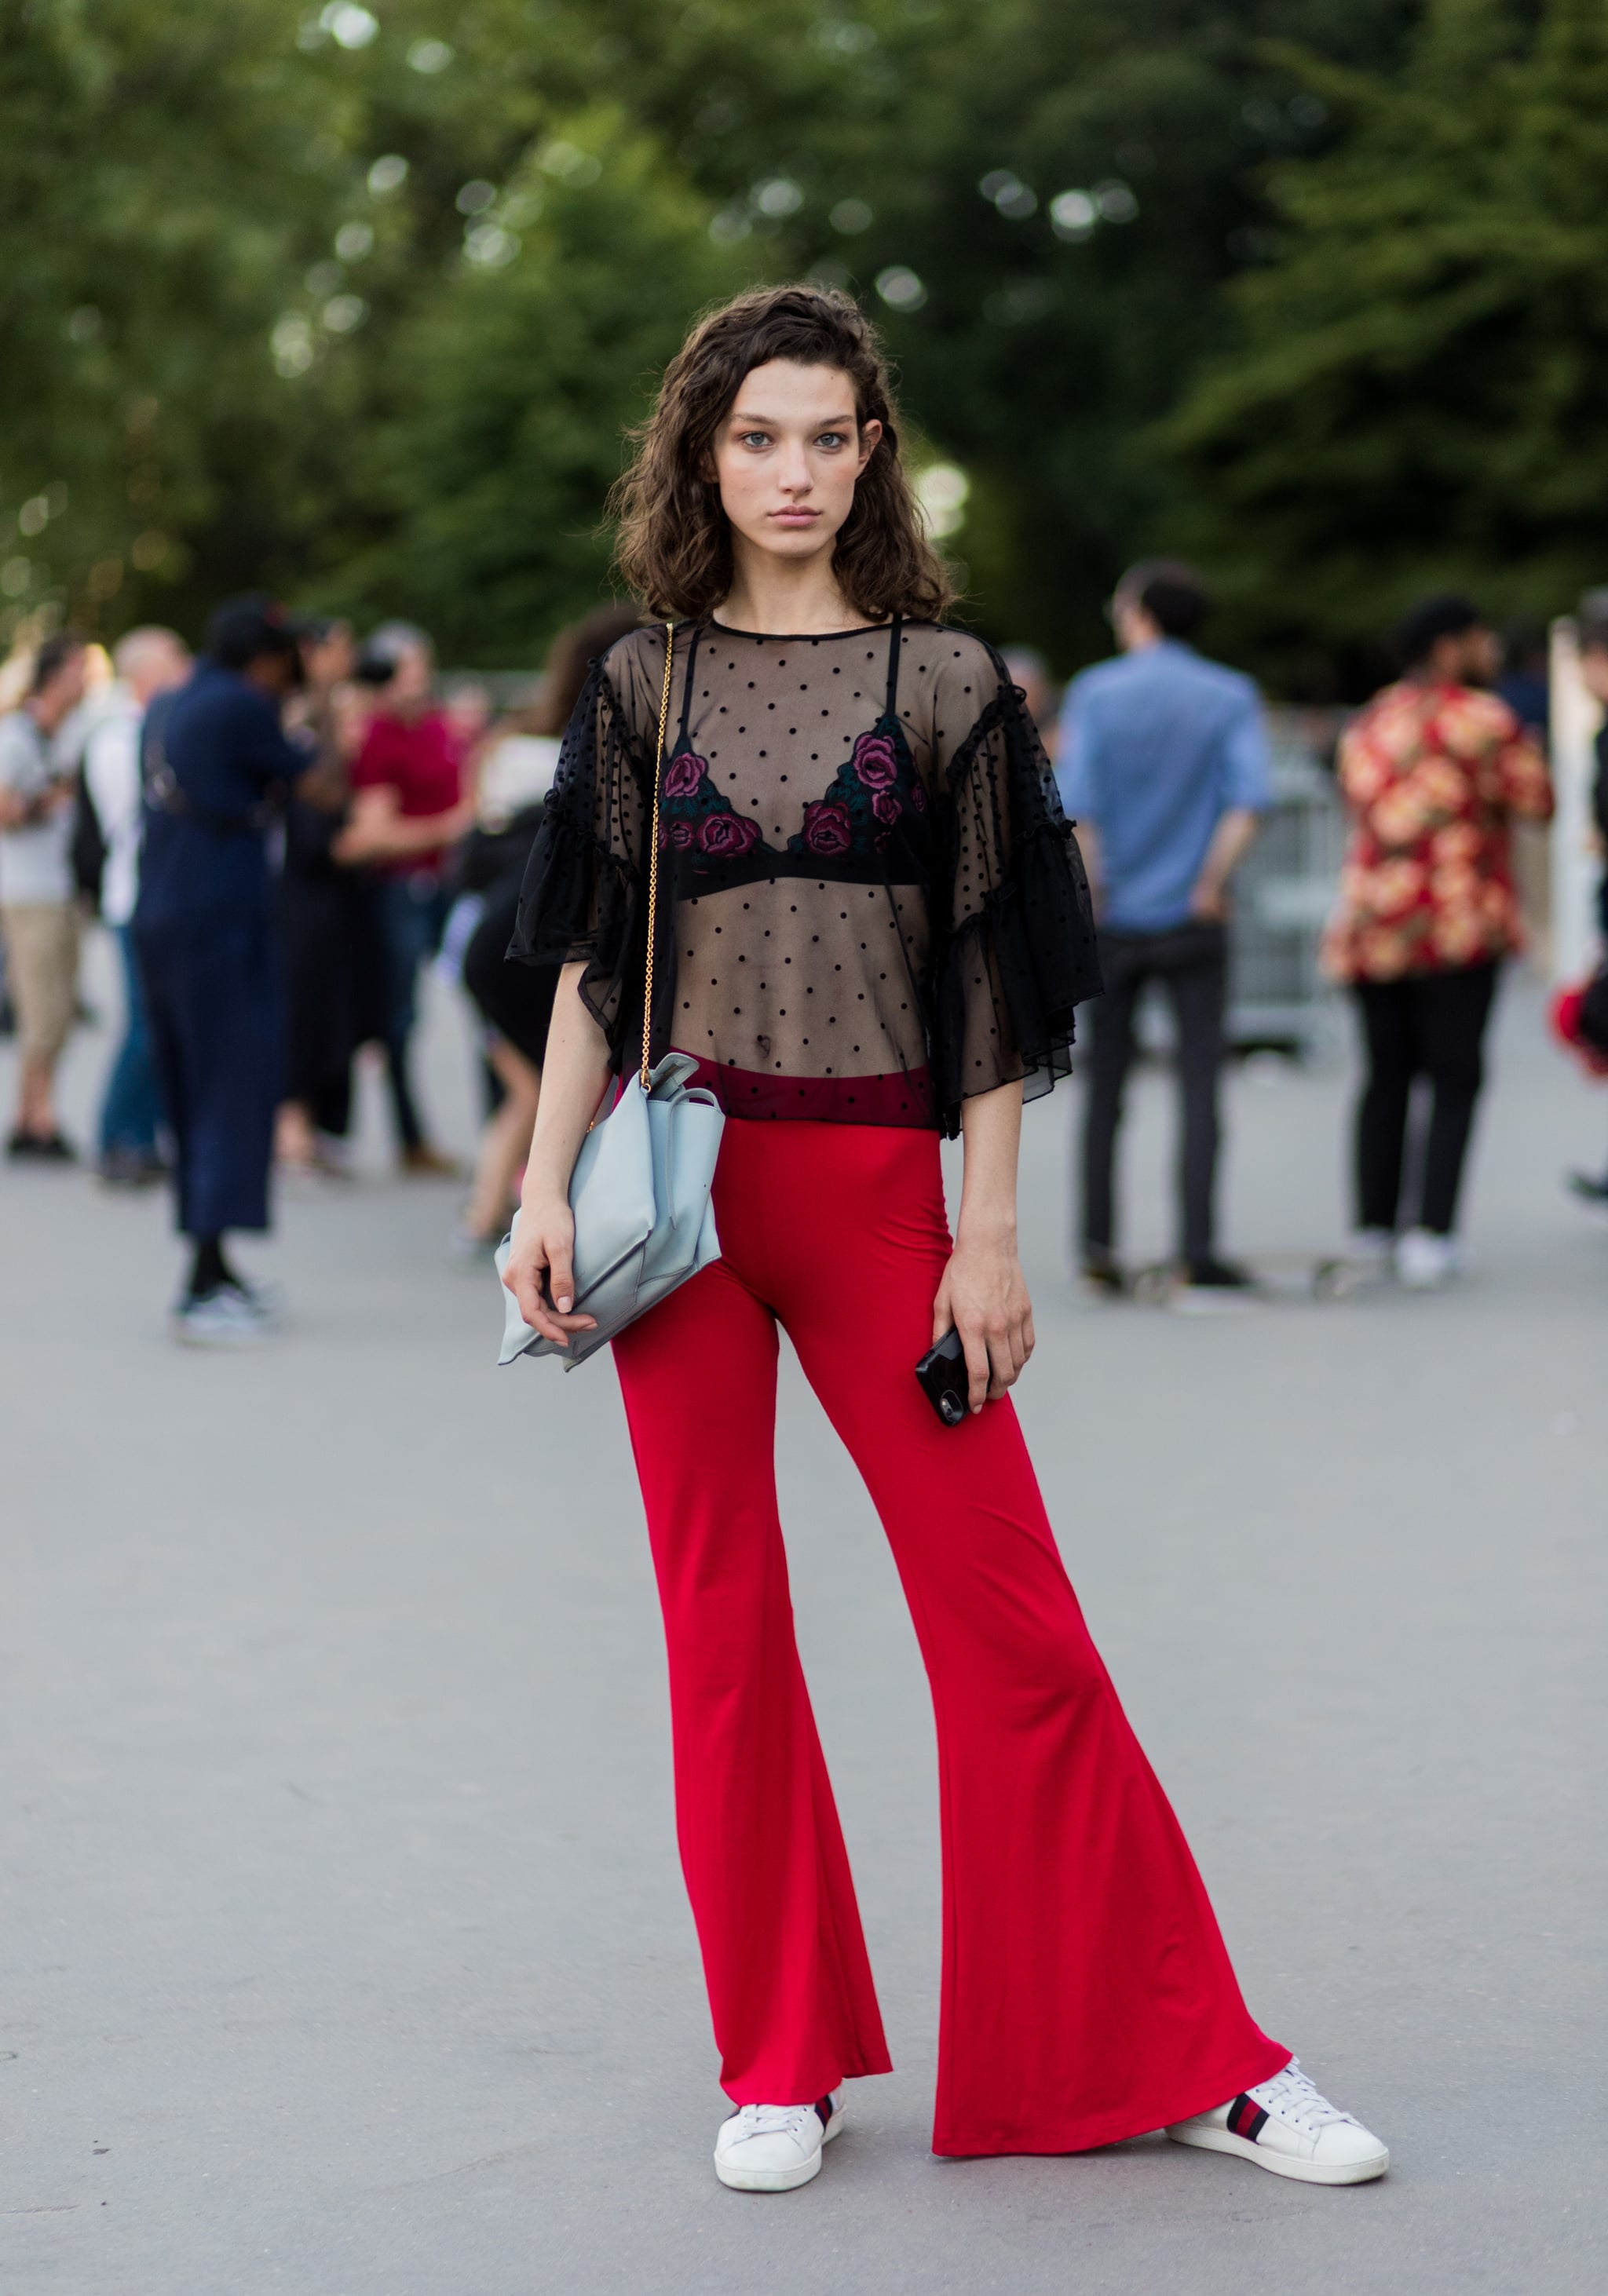 Red flared trousers for Summer? Paris Has Summer's Best Street Style Looks to Right | POPSUGAR Fashion 16